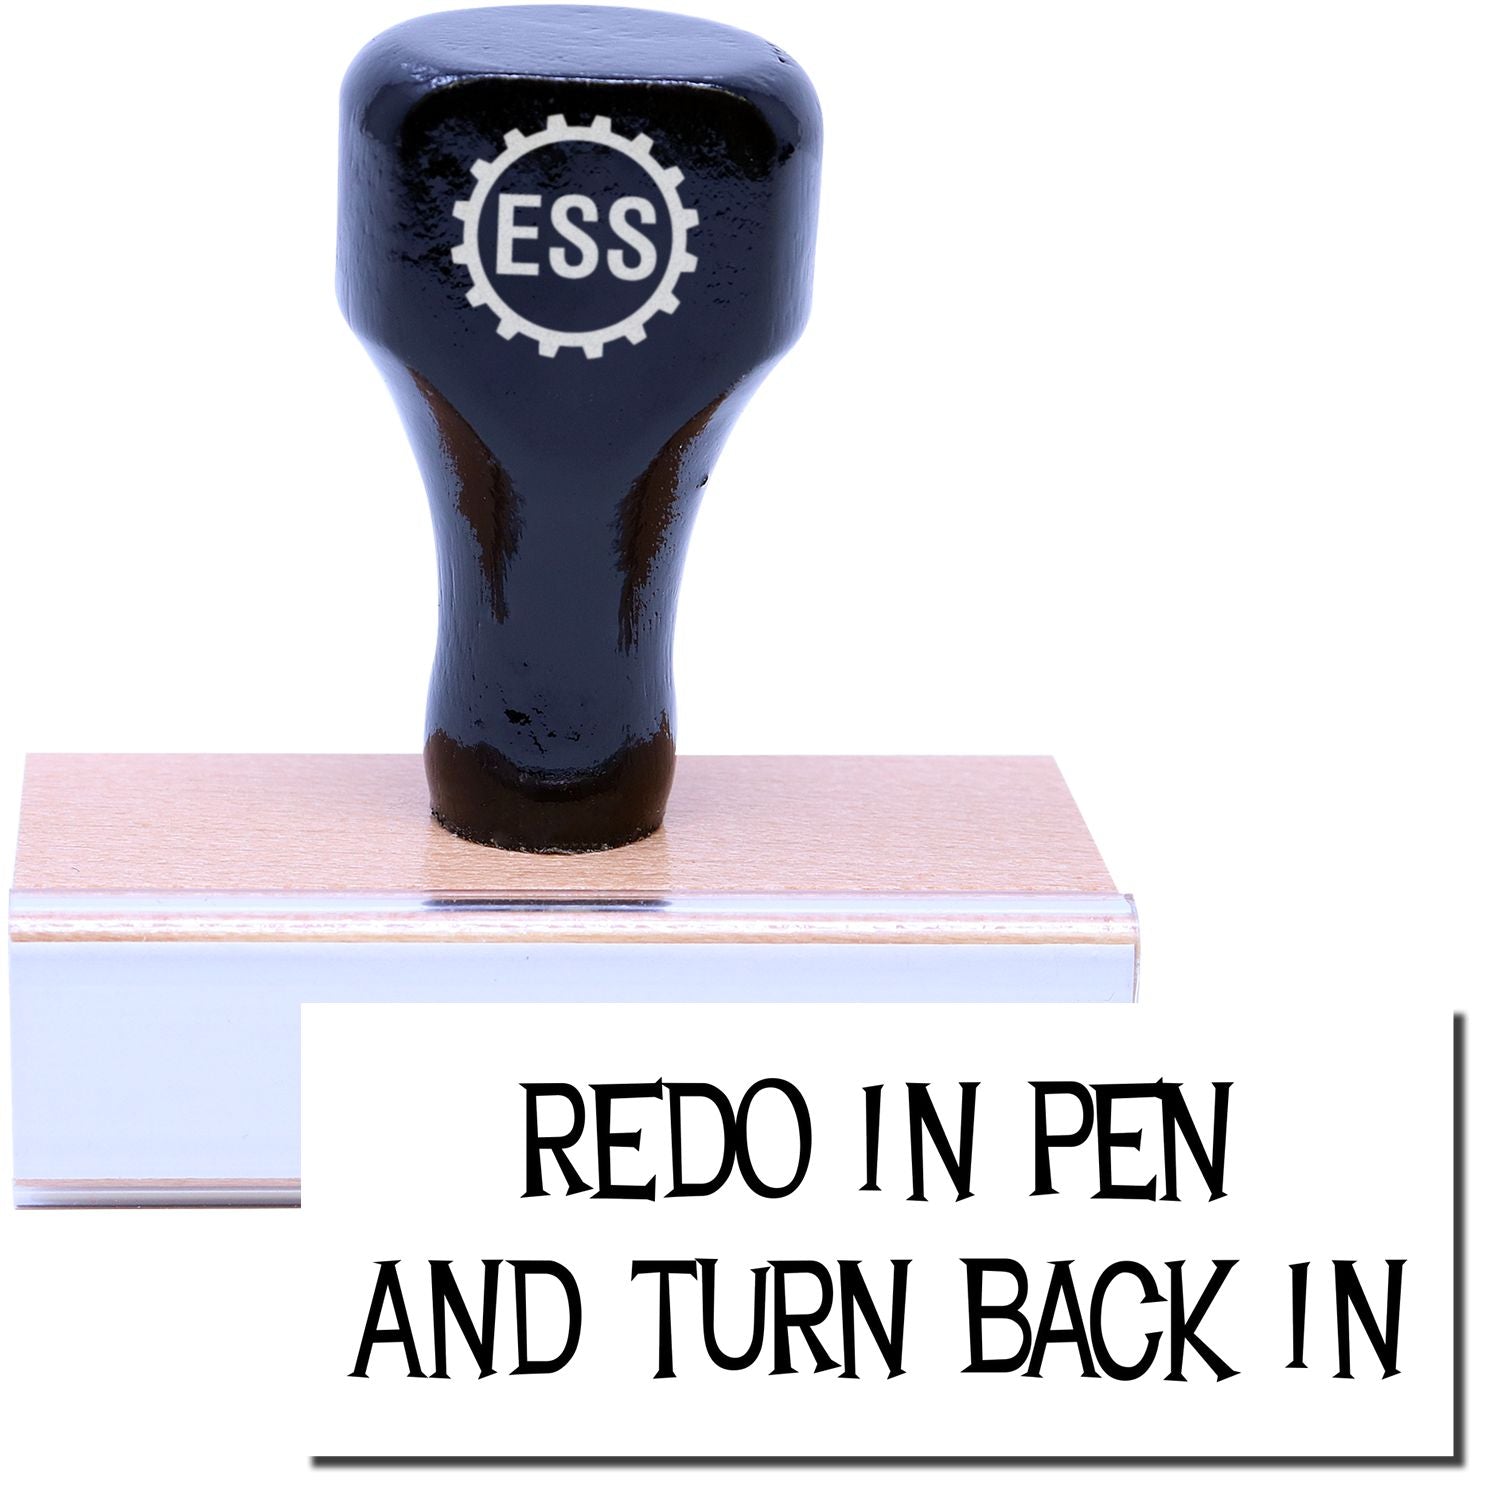 A stock office rubber stamp with a stamped image showing how the text "REDO IN PEN AND TURN BACK IN" is displayed after stamping.